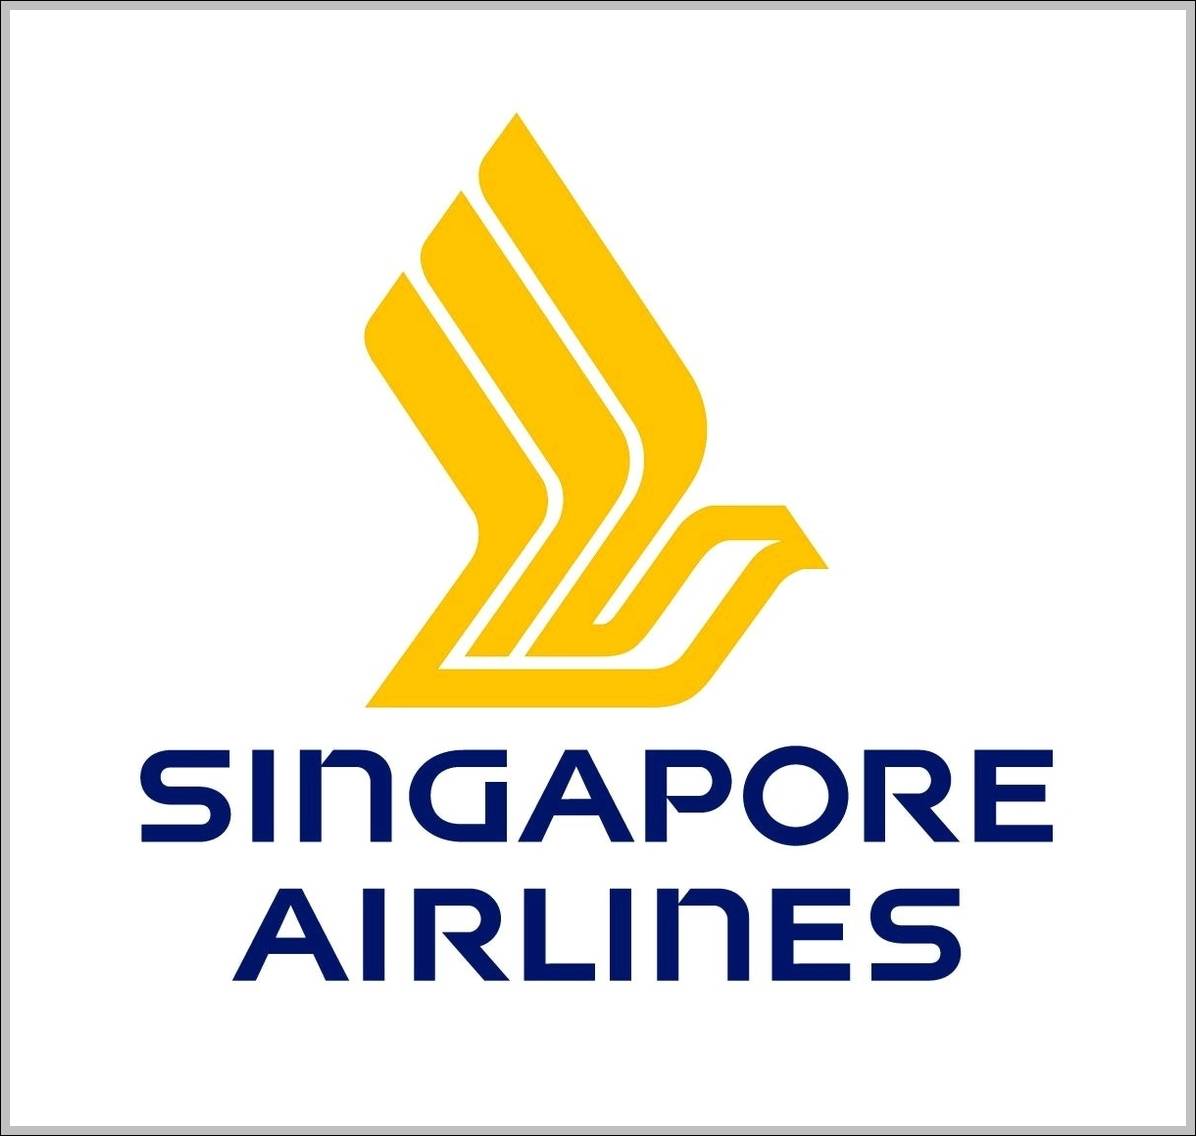 Singapore Airlines logo vertical